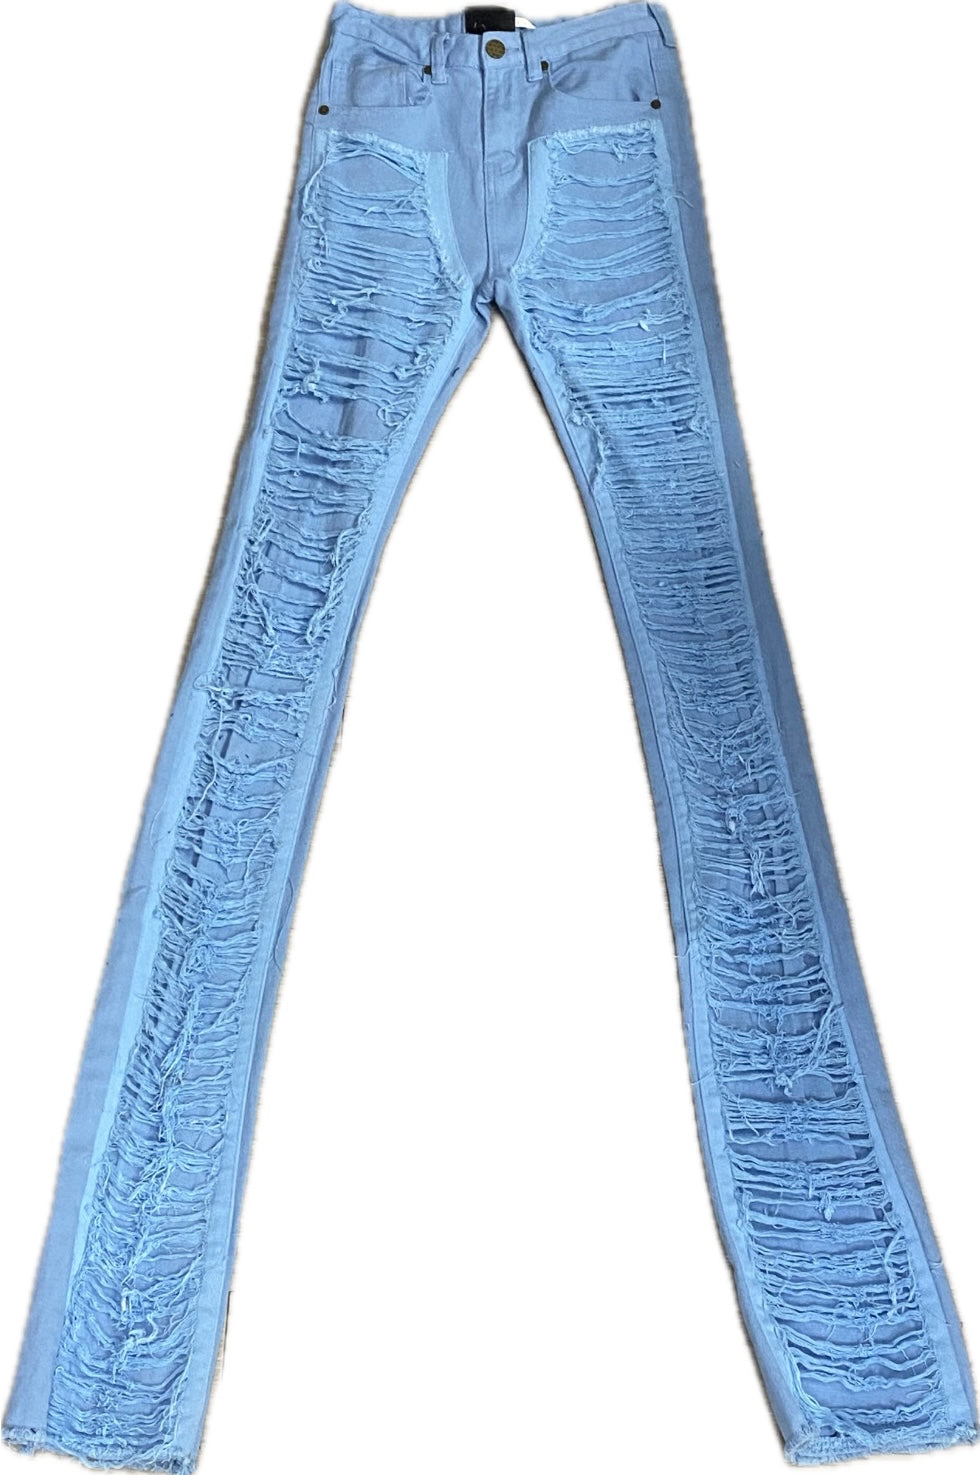 MEN’S CLOUD 9 STACKED FIT BABY BLUE JEANS